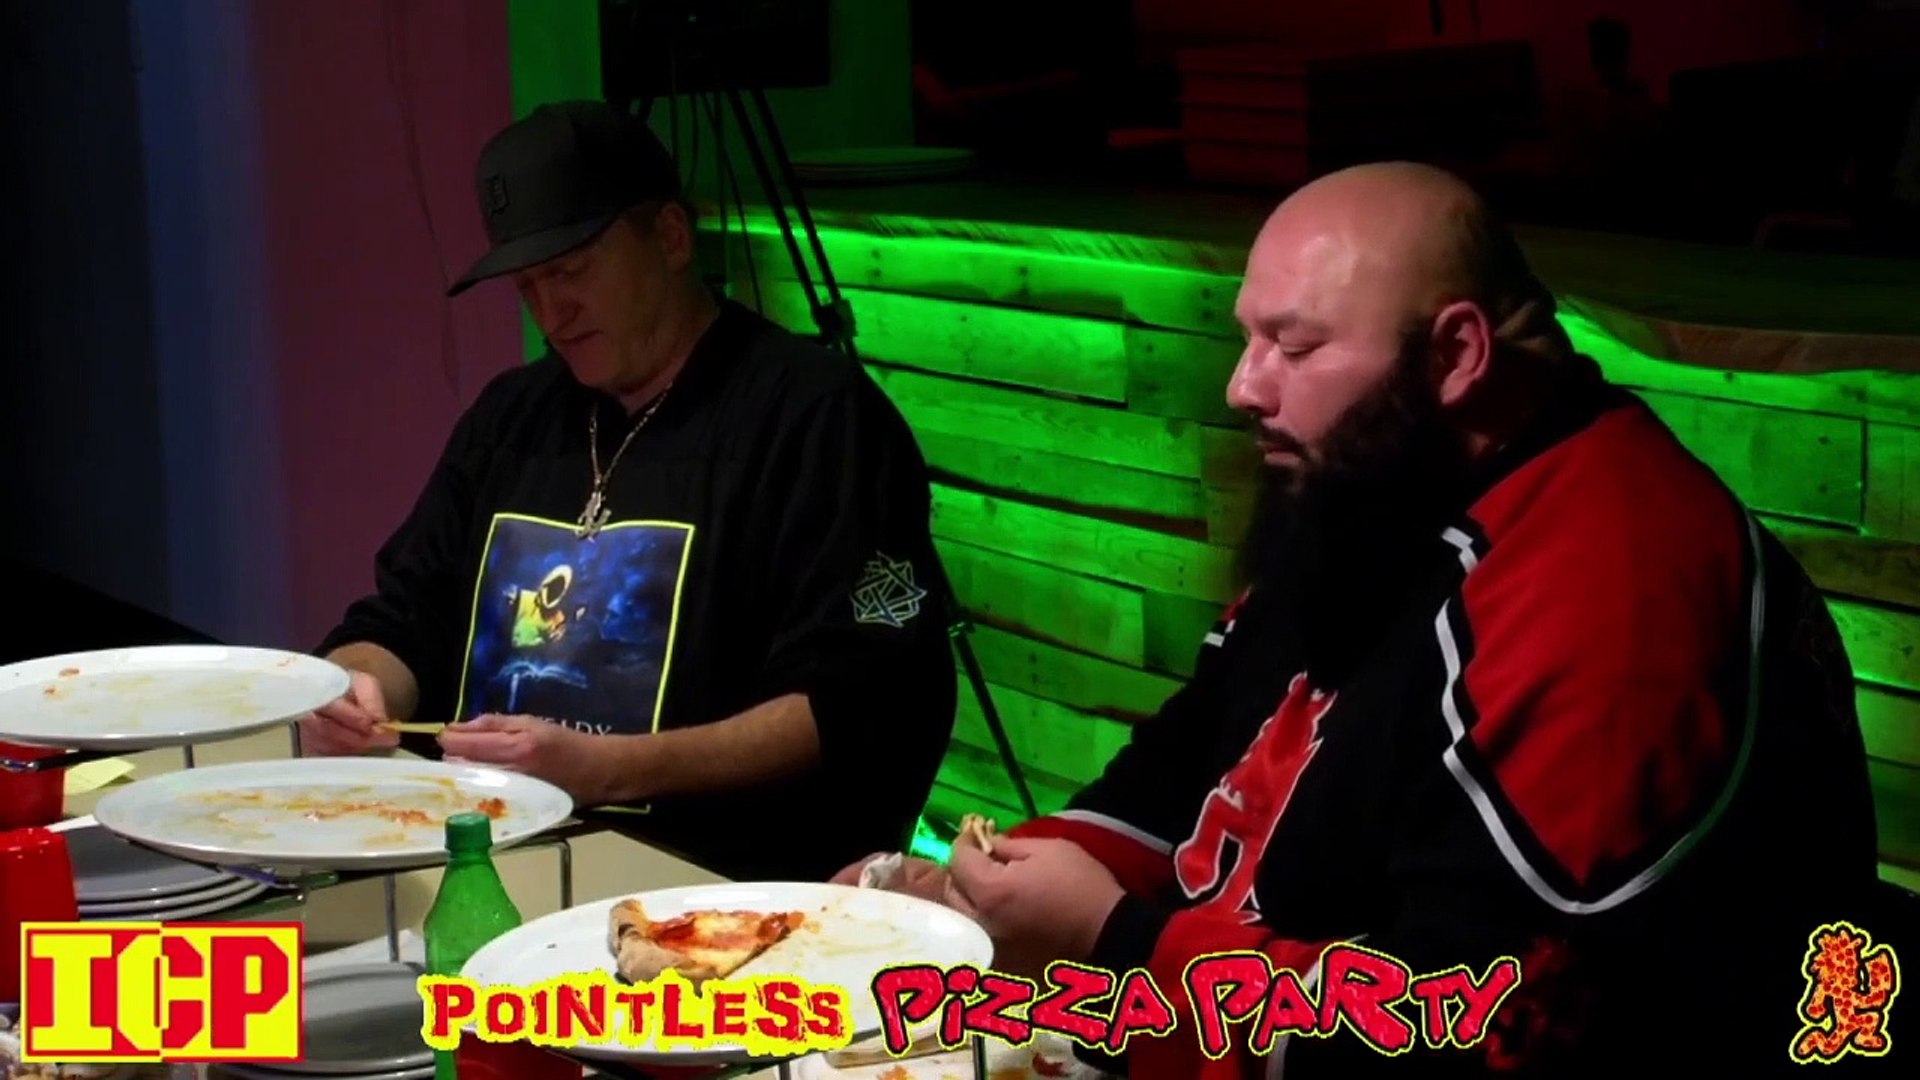 ICP Pointless Pizza Party 12-30-2020 [Part 2]